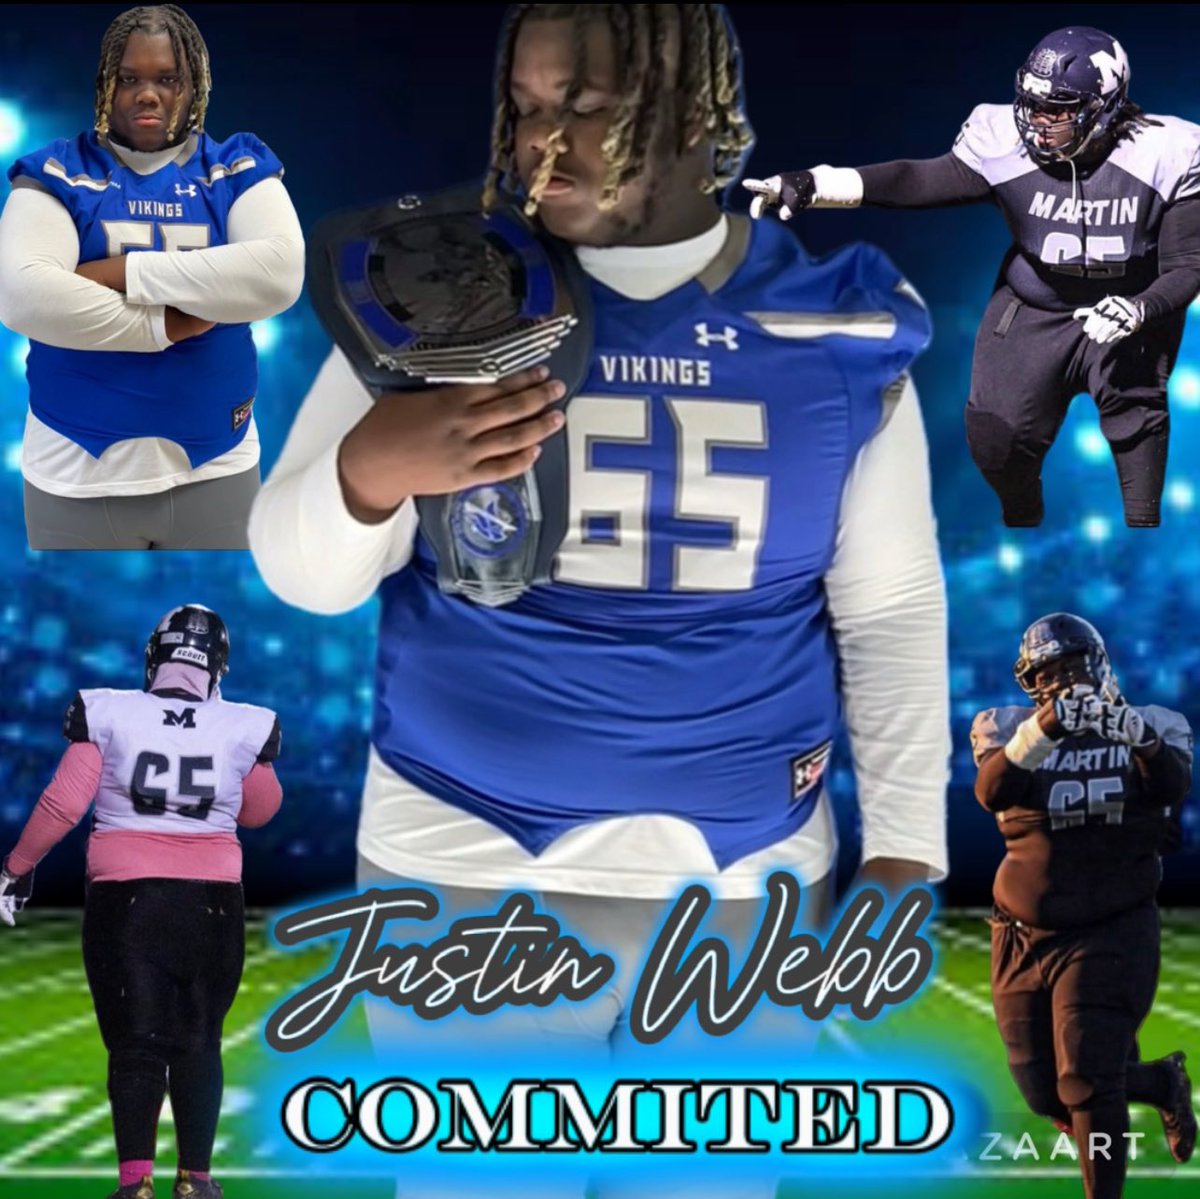 1000% committed. Viking country, let’s ride. 💙🤍 #AGTG @Coach_Jenks @cdp0126 @CoachFloyd252 @J__Chase1 @Coach_MHilliard @asim_mcgill